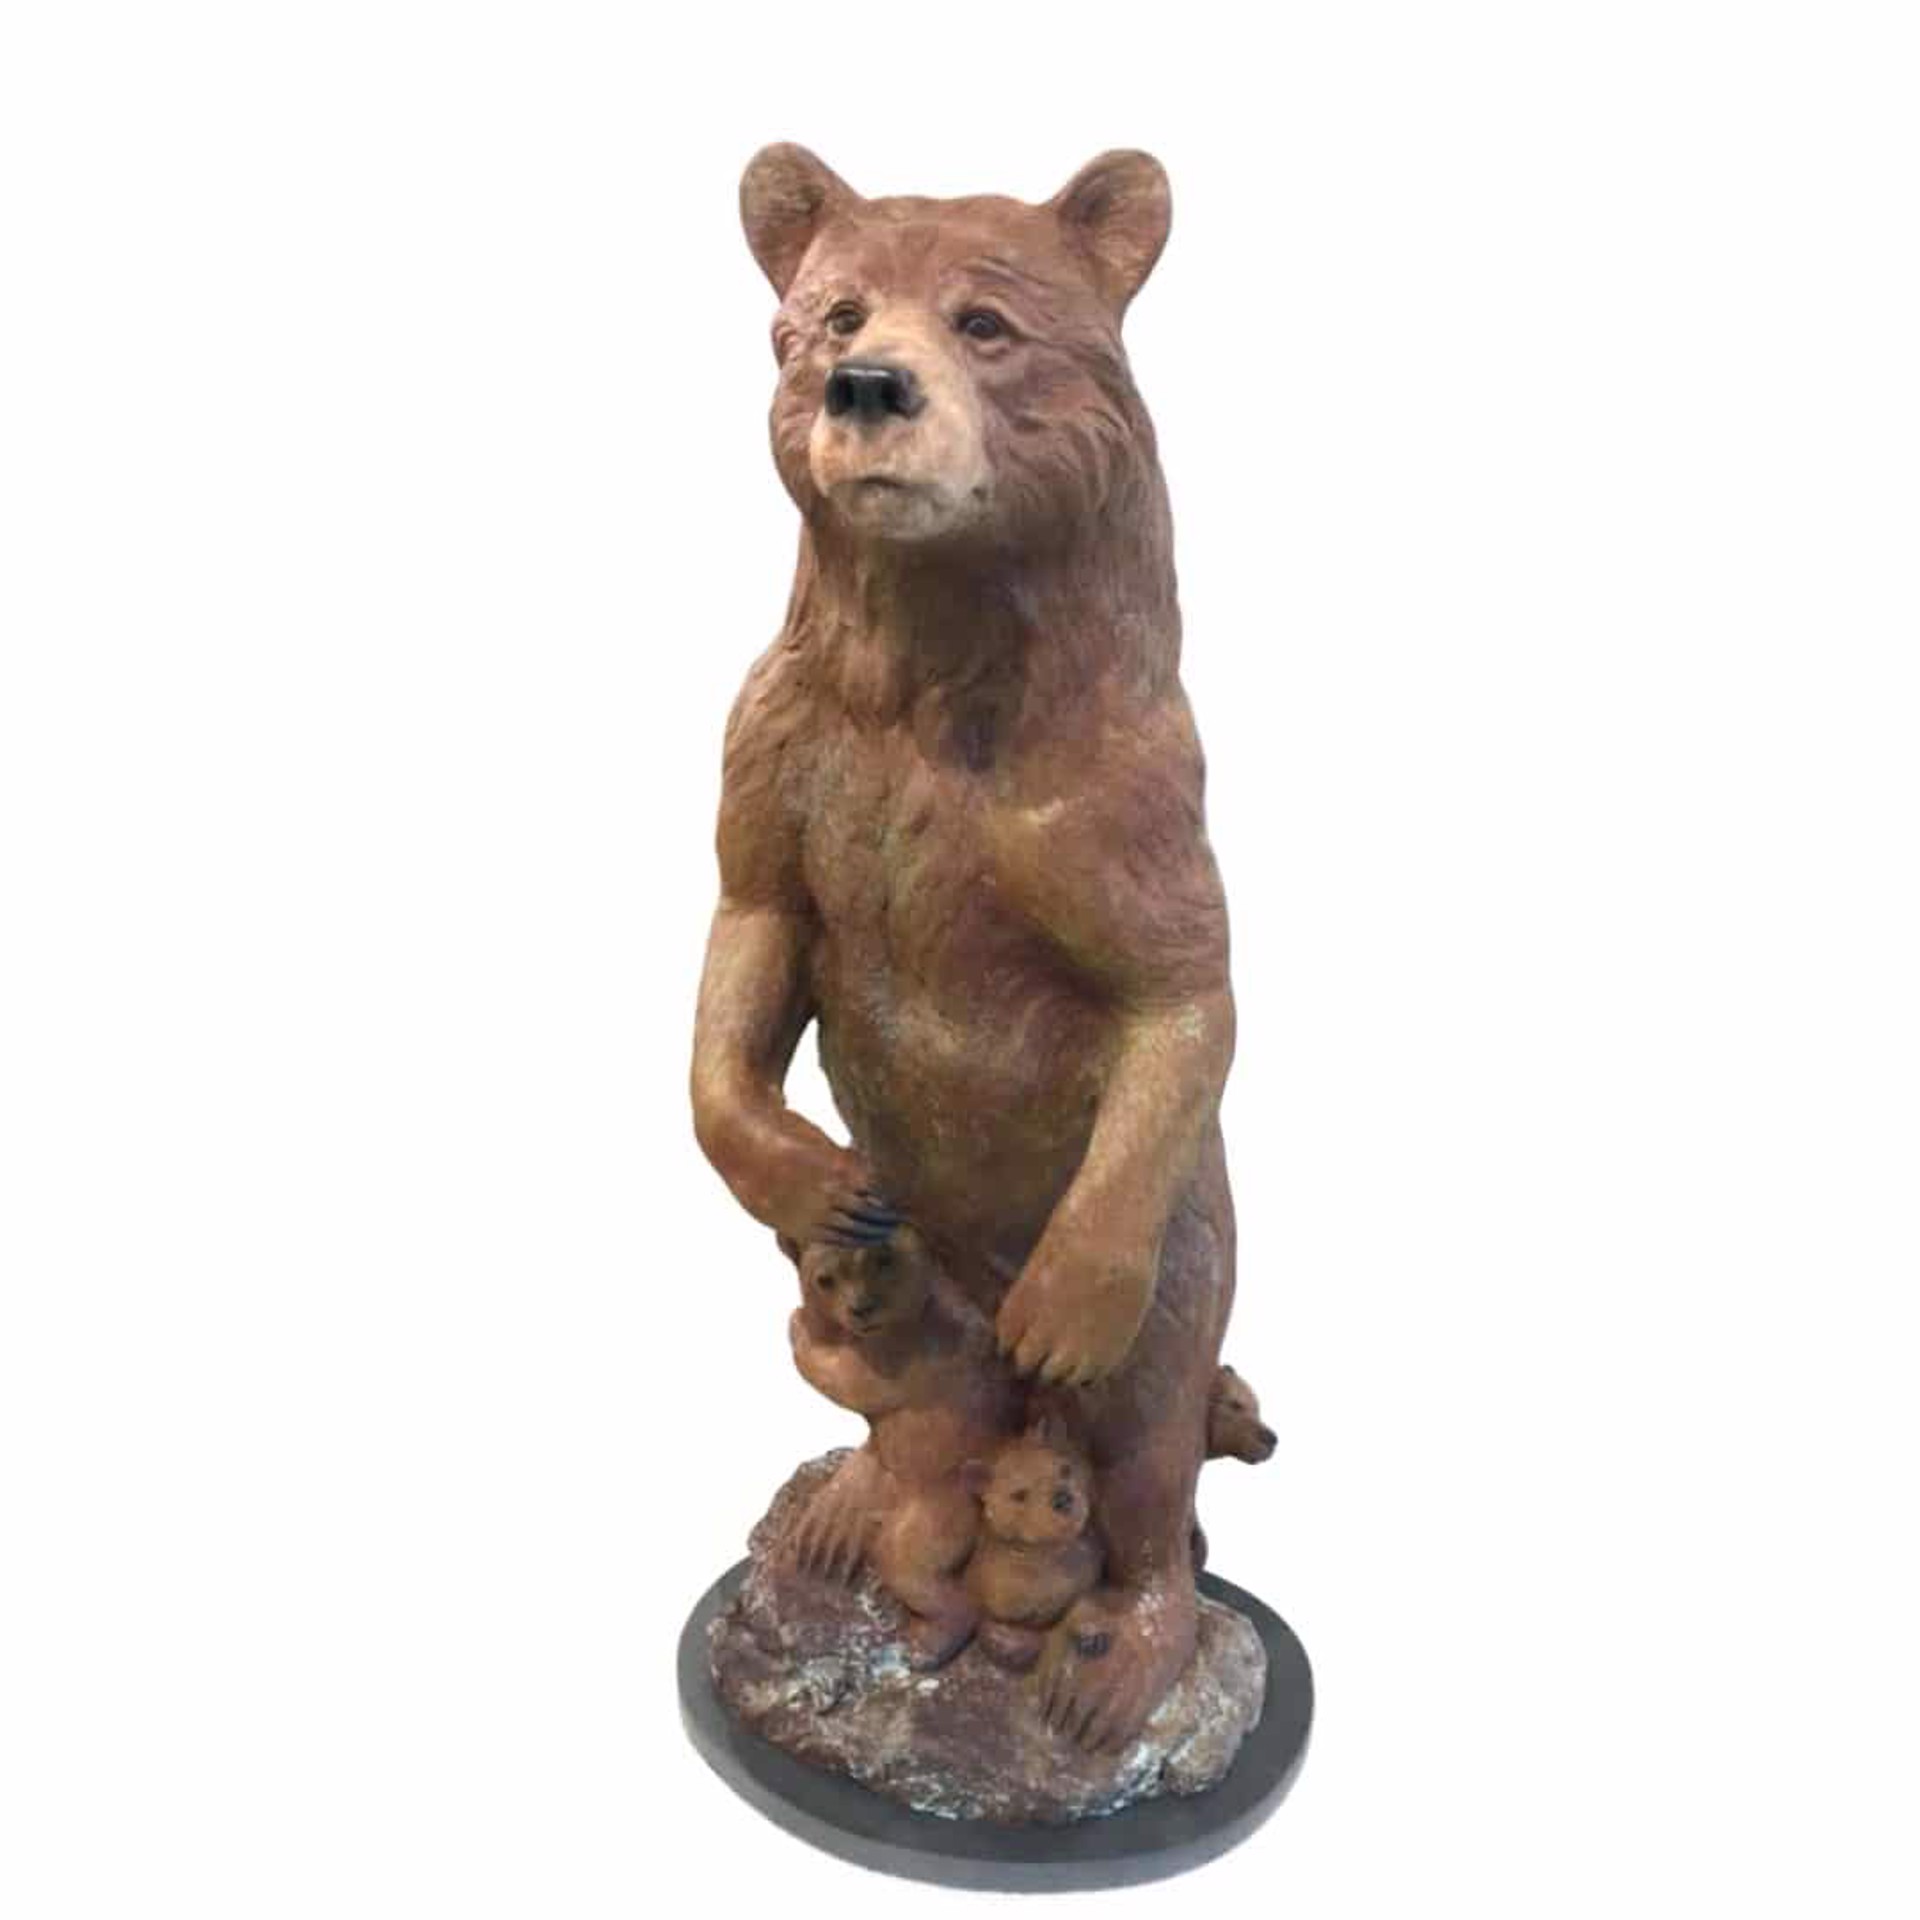 Grizzly Bear 399 Original Bronze Sculpture by Rip and Alison Caswell, Contemporary Fine Art, Modern Wildlife Art, Available At Gallery Wild